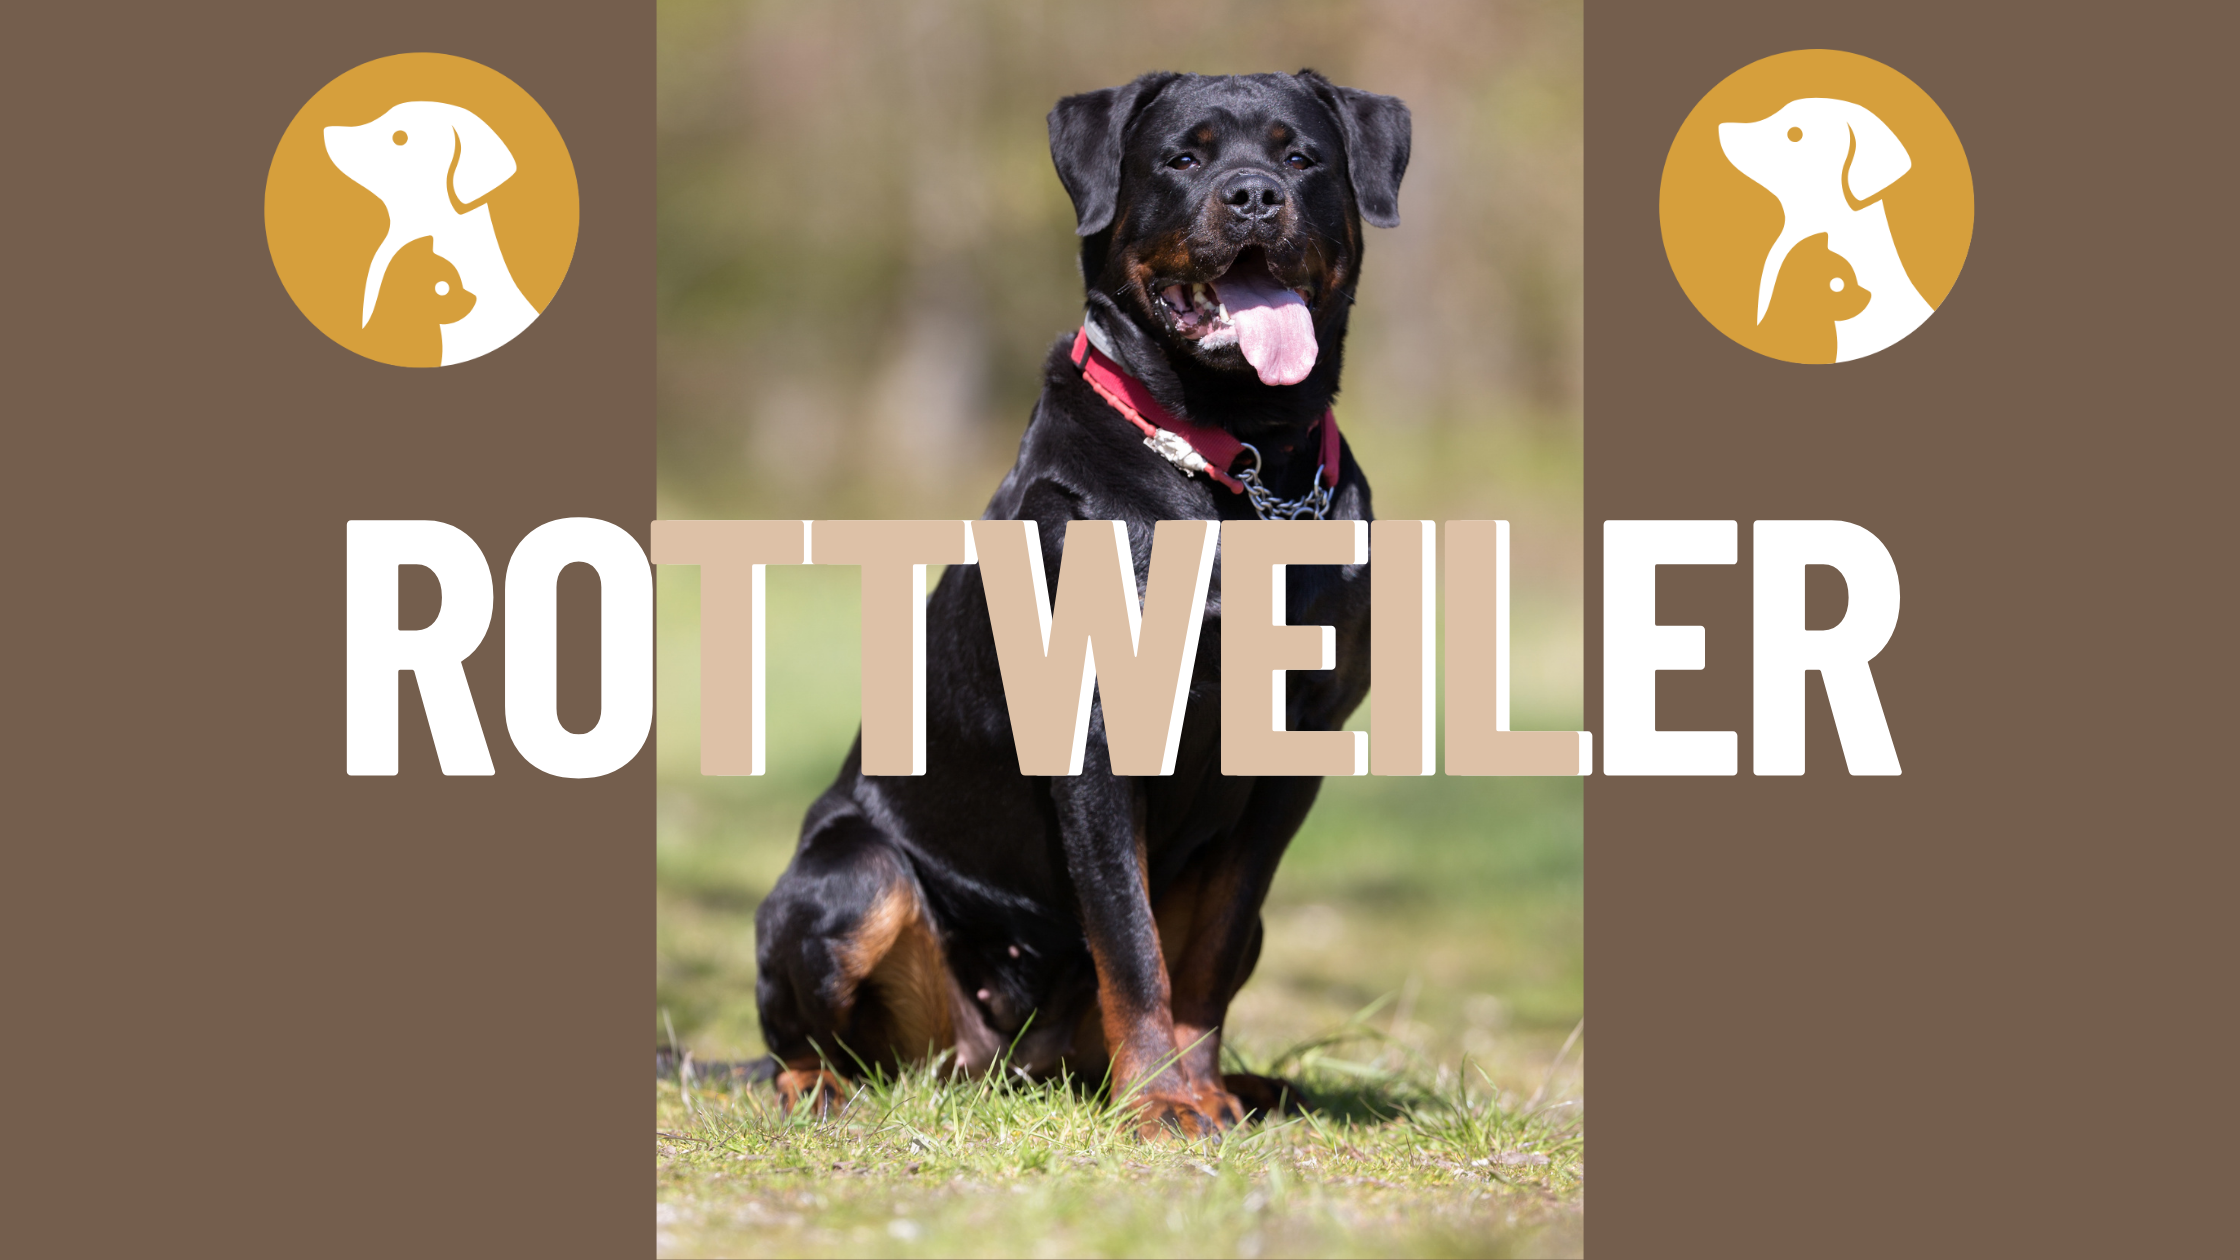 What Are The Characteristics And Personality Traits Of A Rottweiler